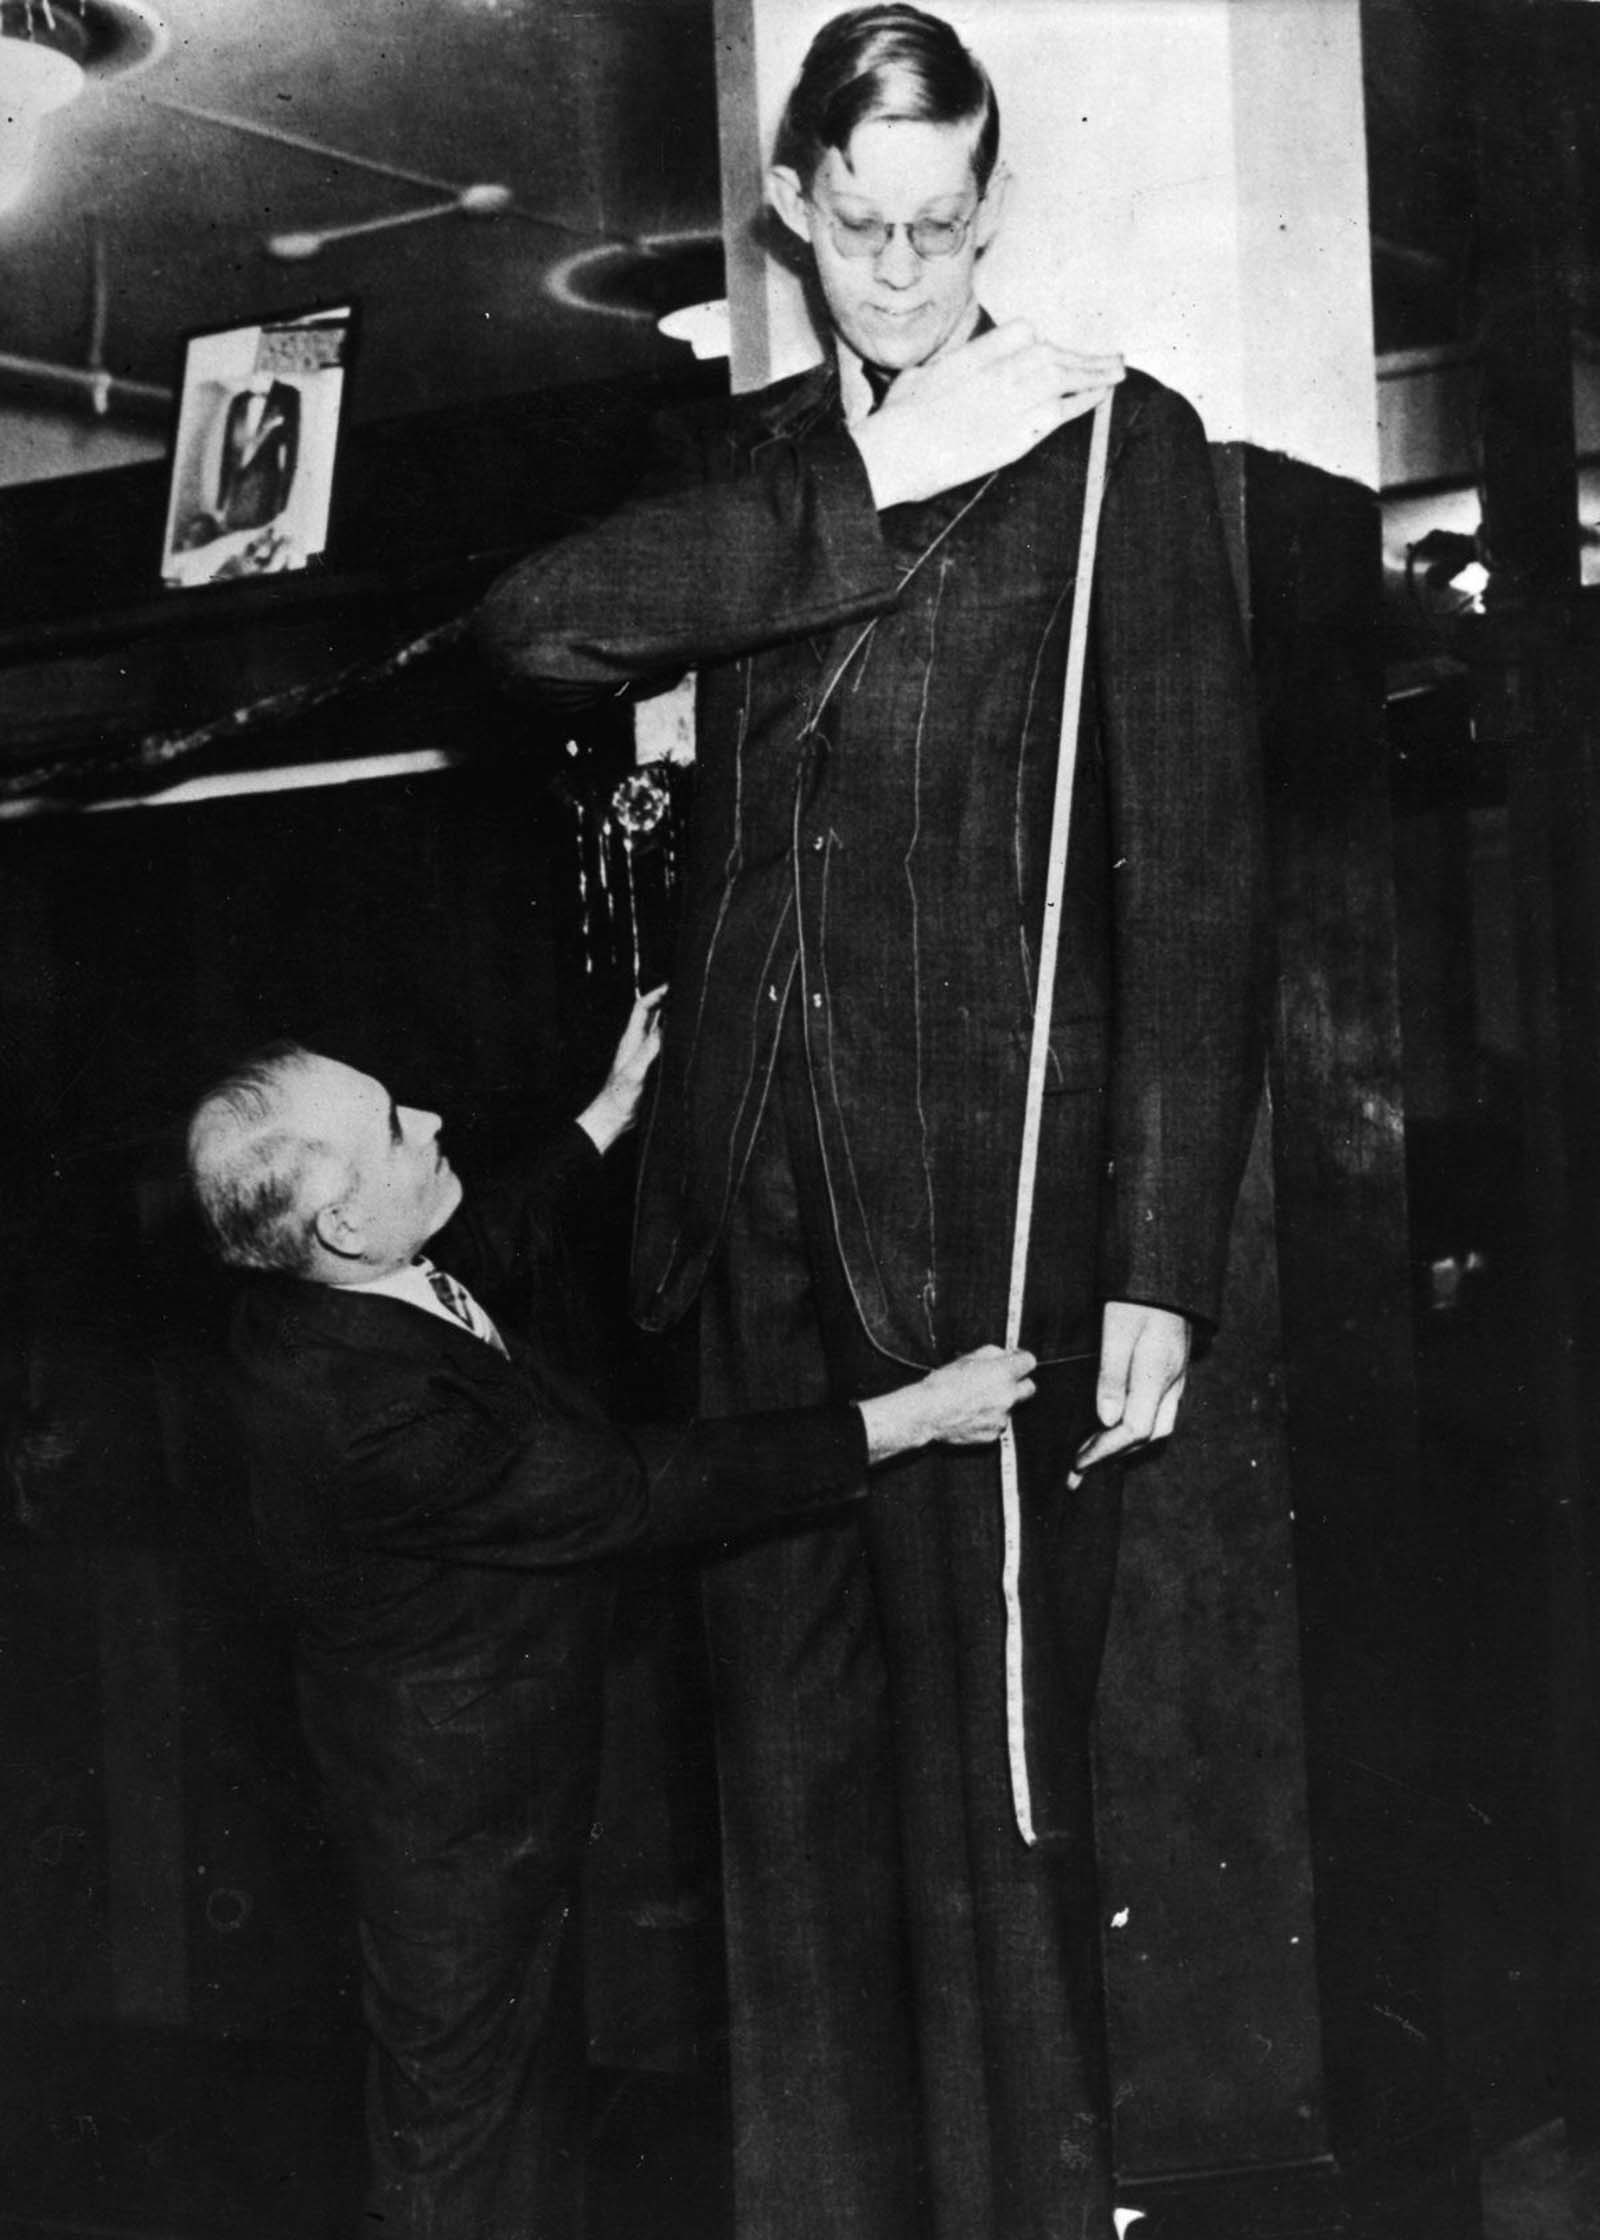 Wadlow is fitted for a jacket, 1939.